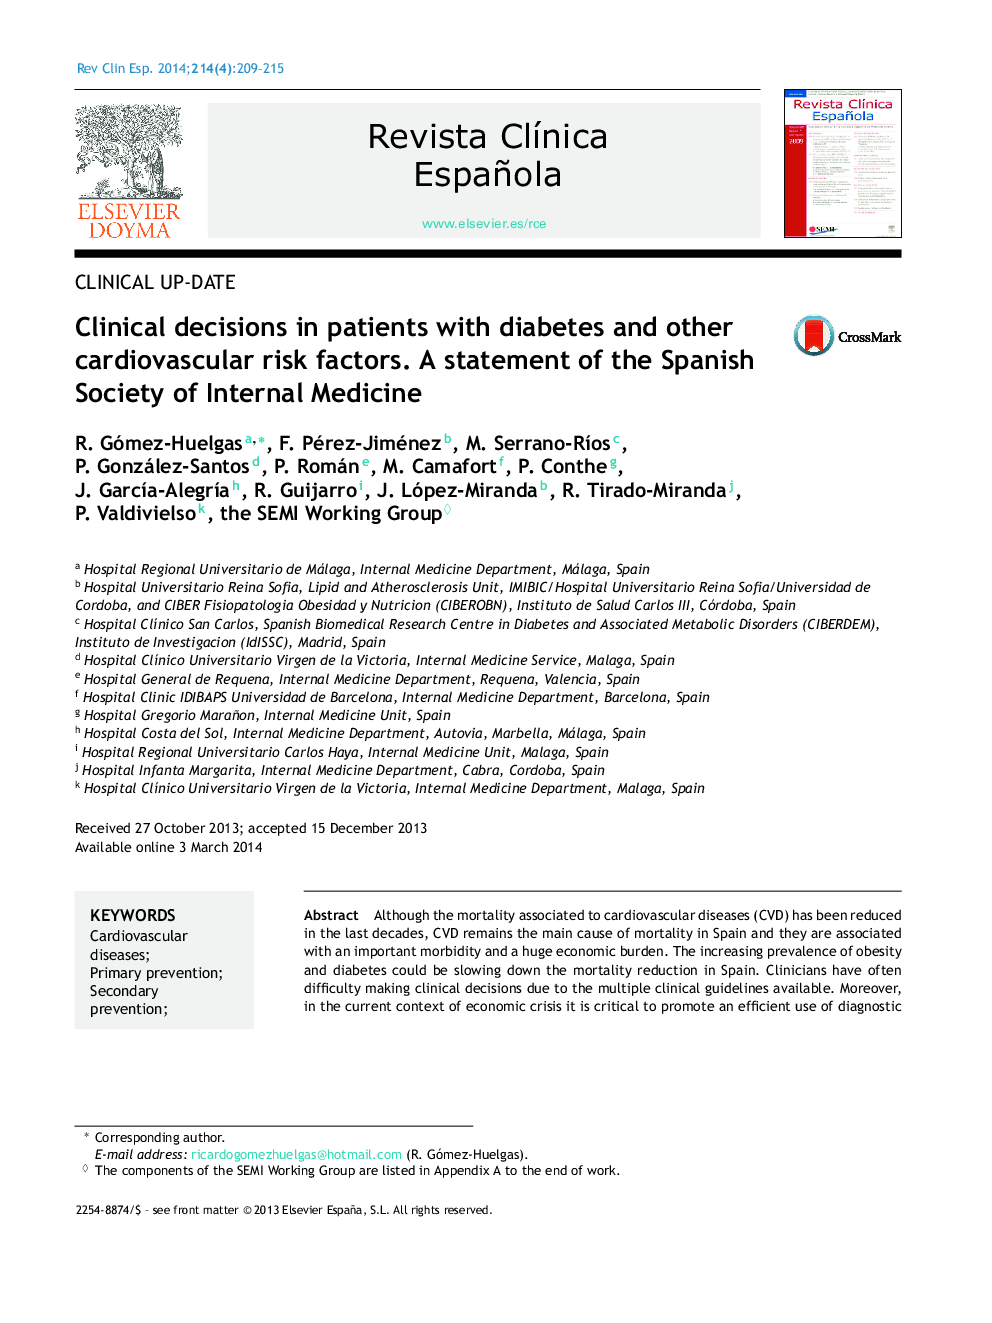 Clinical decisions in patients with diabetes and other cardiovascular risk factors. A statement of the Spanish Society of Internal Medicine